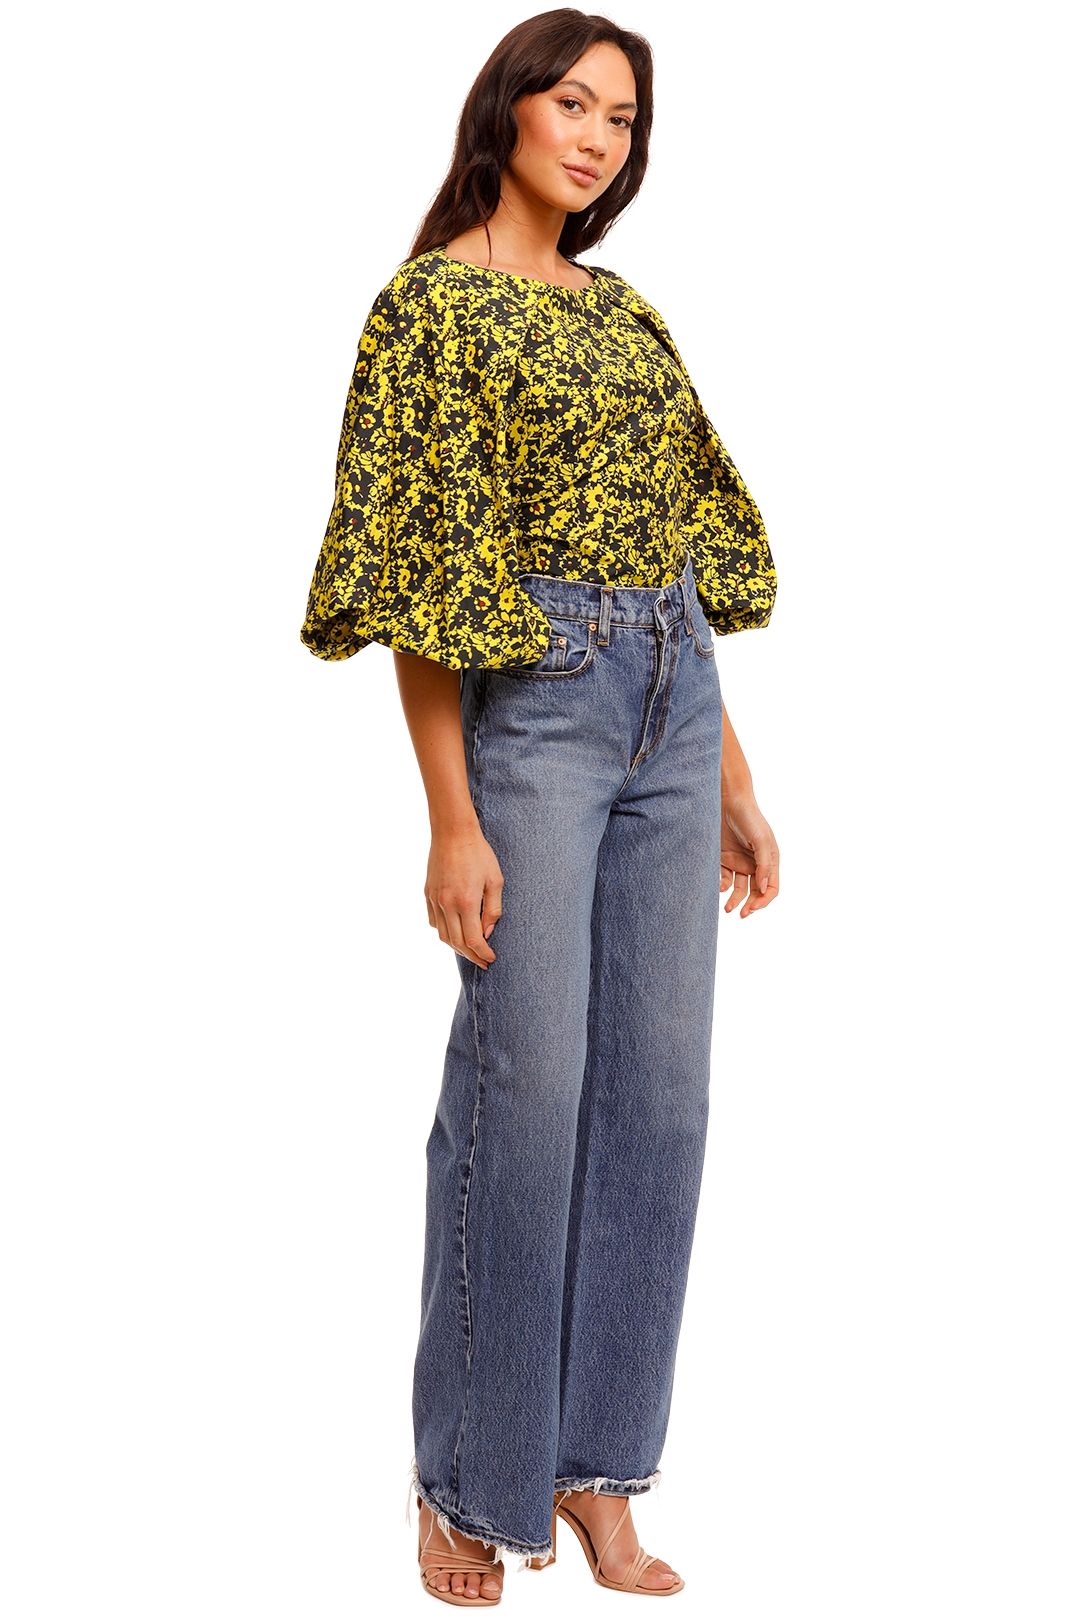 Camilla and Marc Monet Top Floral